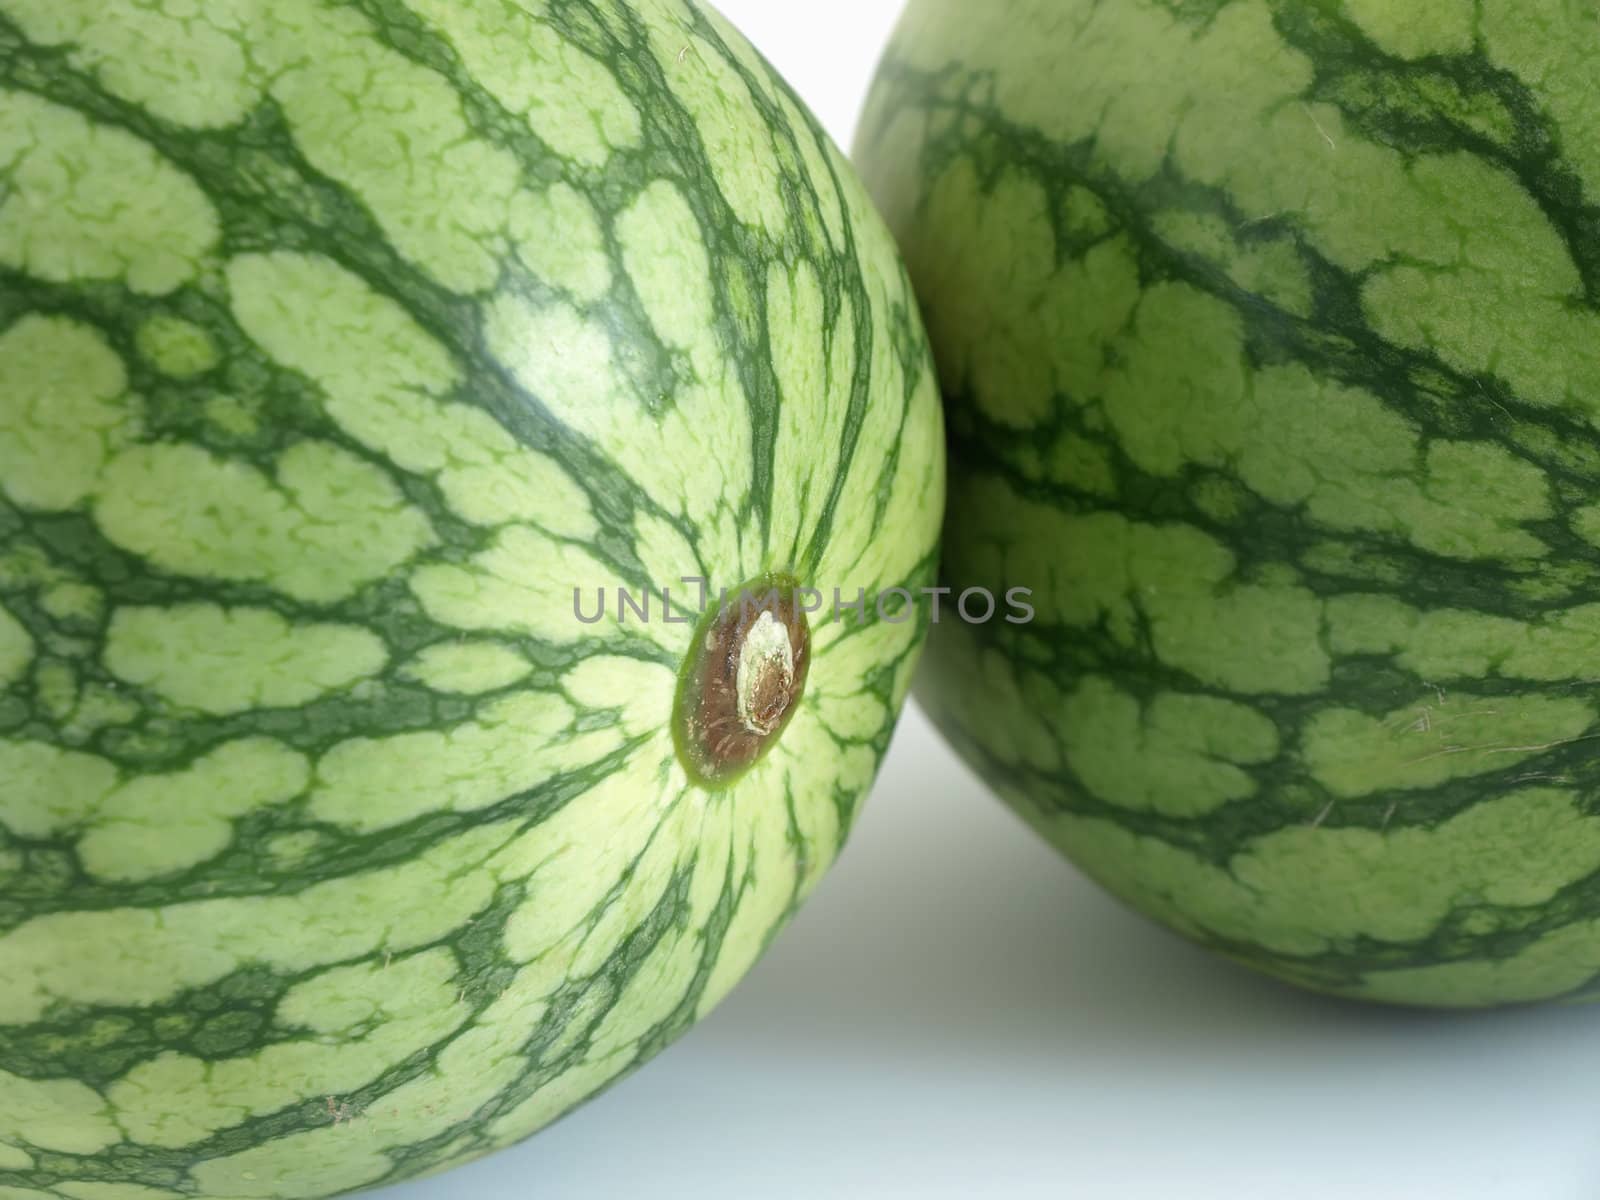 Close up shot of two isolated green watermelons studio isolated against a white background.